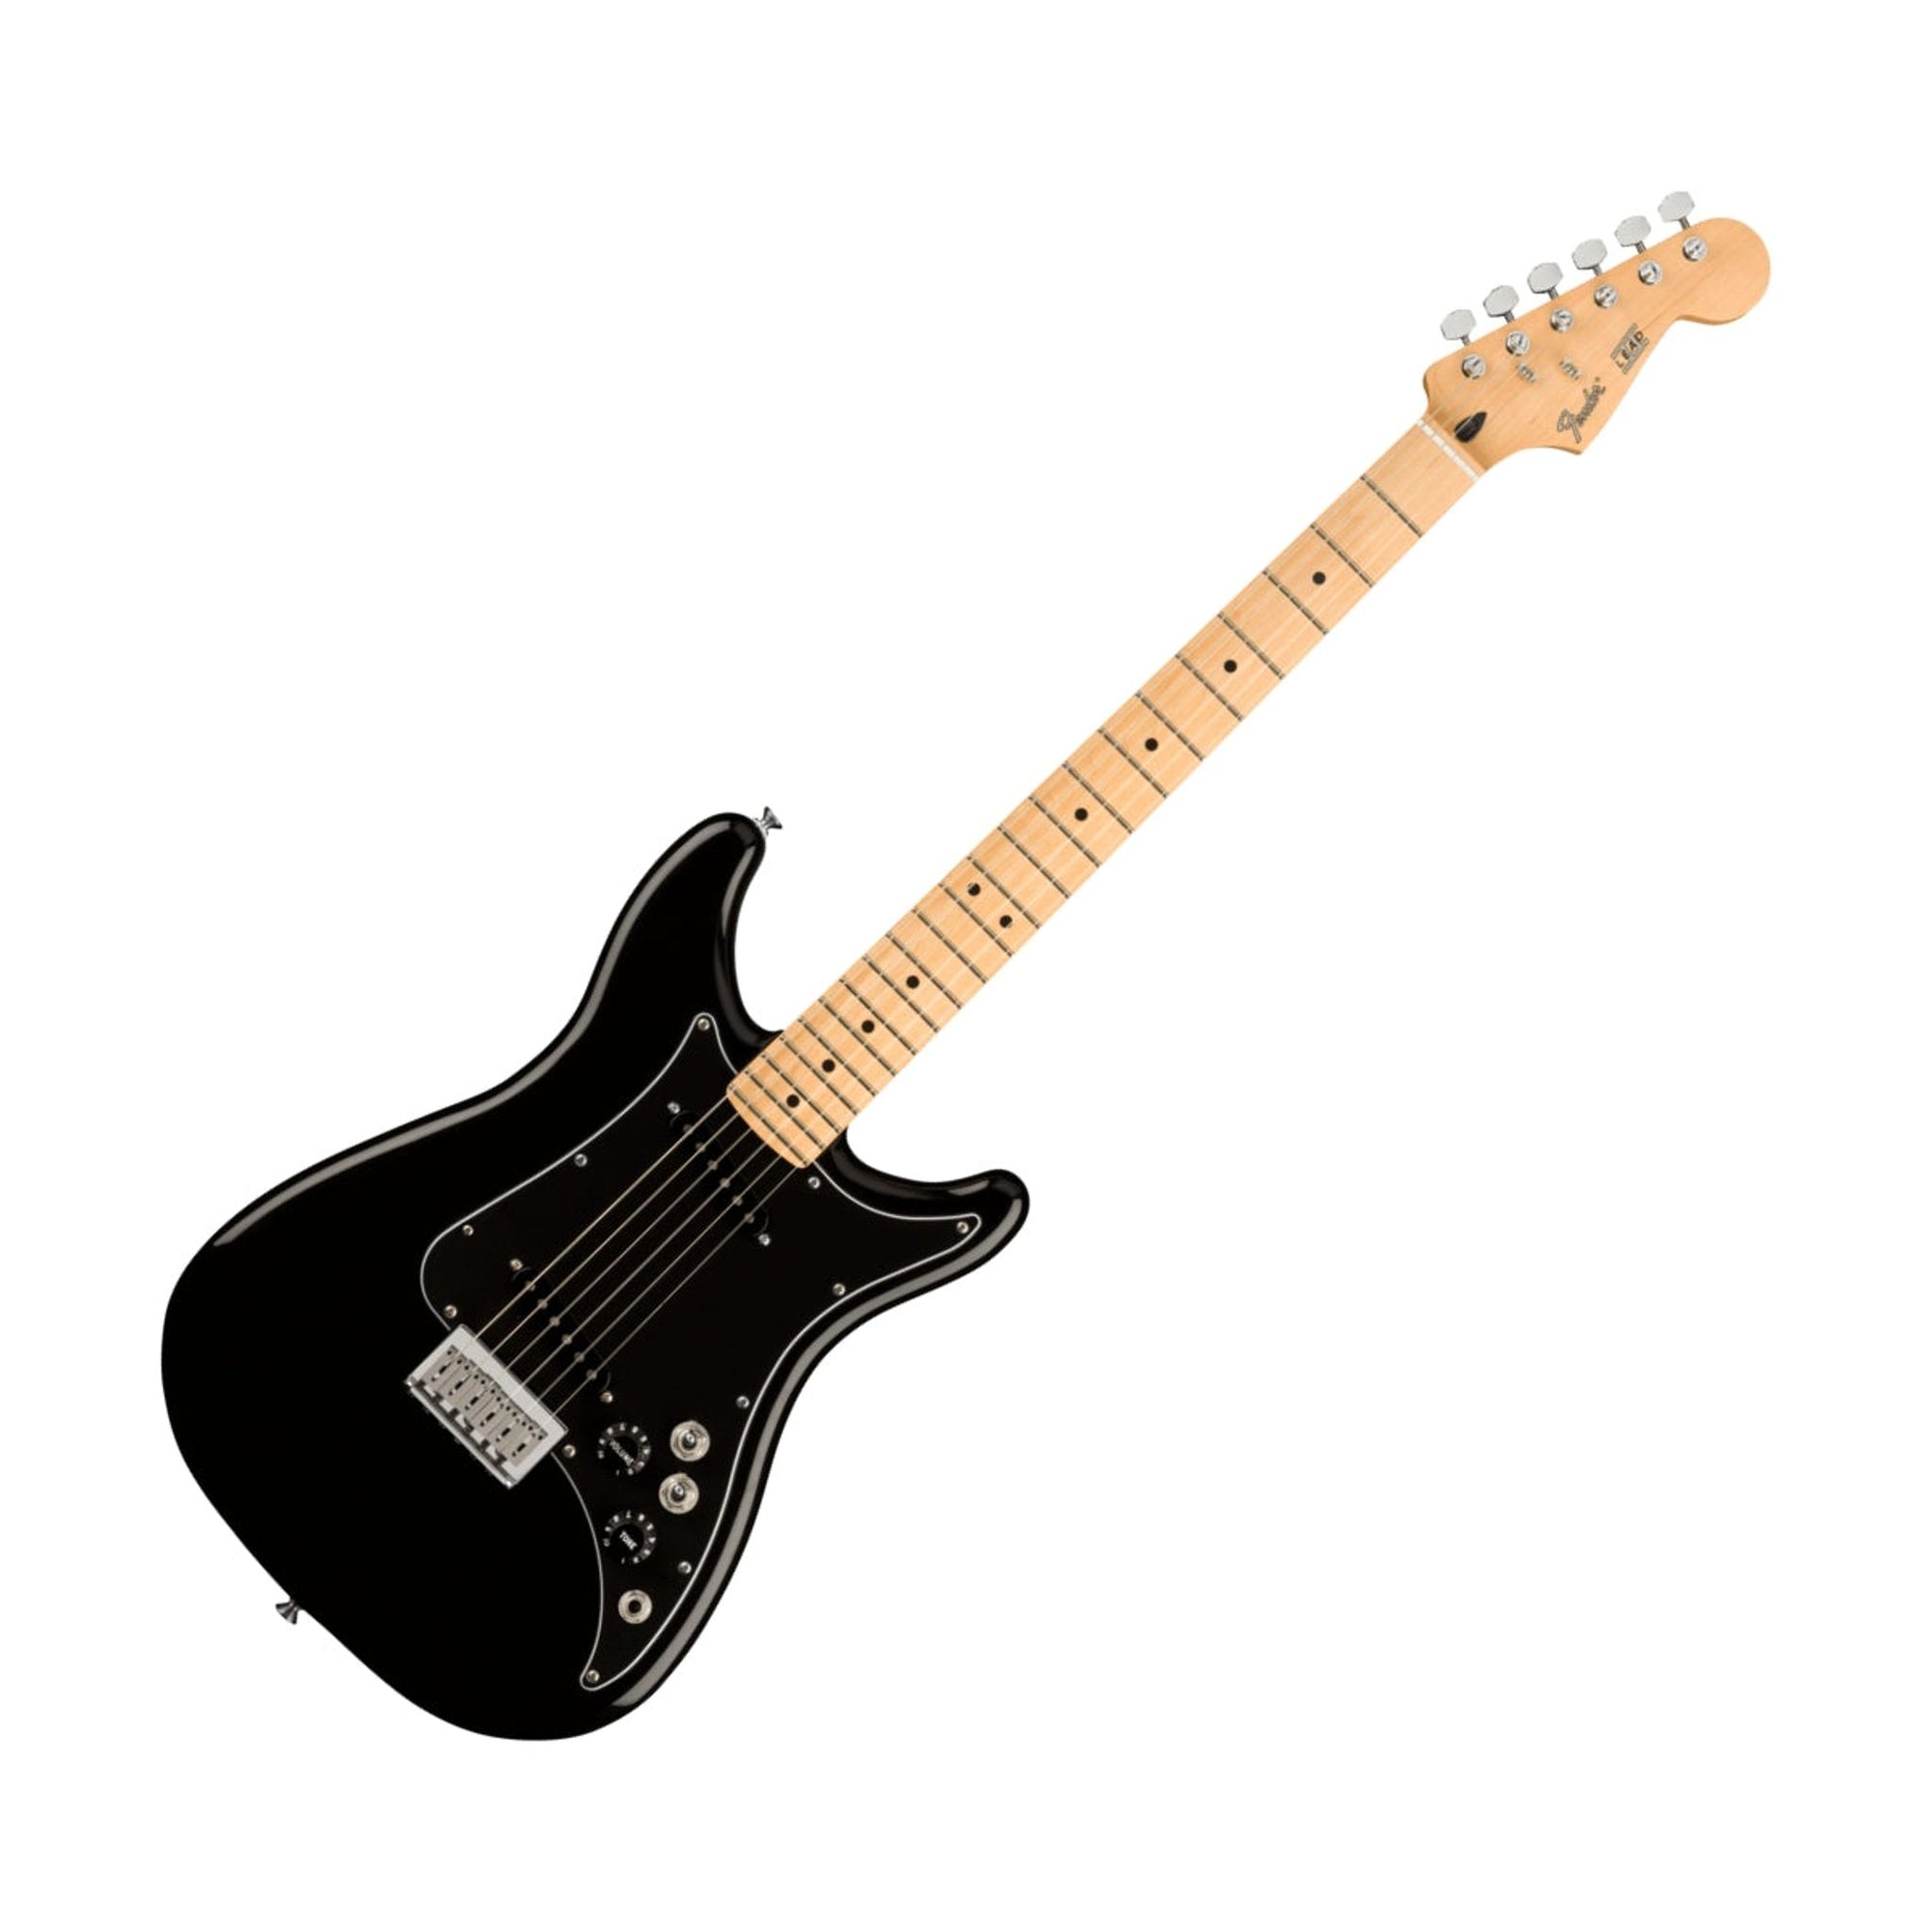 The Fender Lead II Electric Guitar is high-quality at a low-price with m any great features. Appealing to a wide variety of players, the sleek new Lead models kicked off a fresh creative era in Fender’s history.